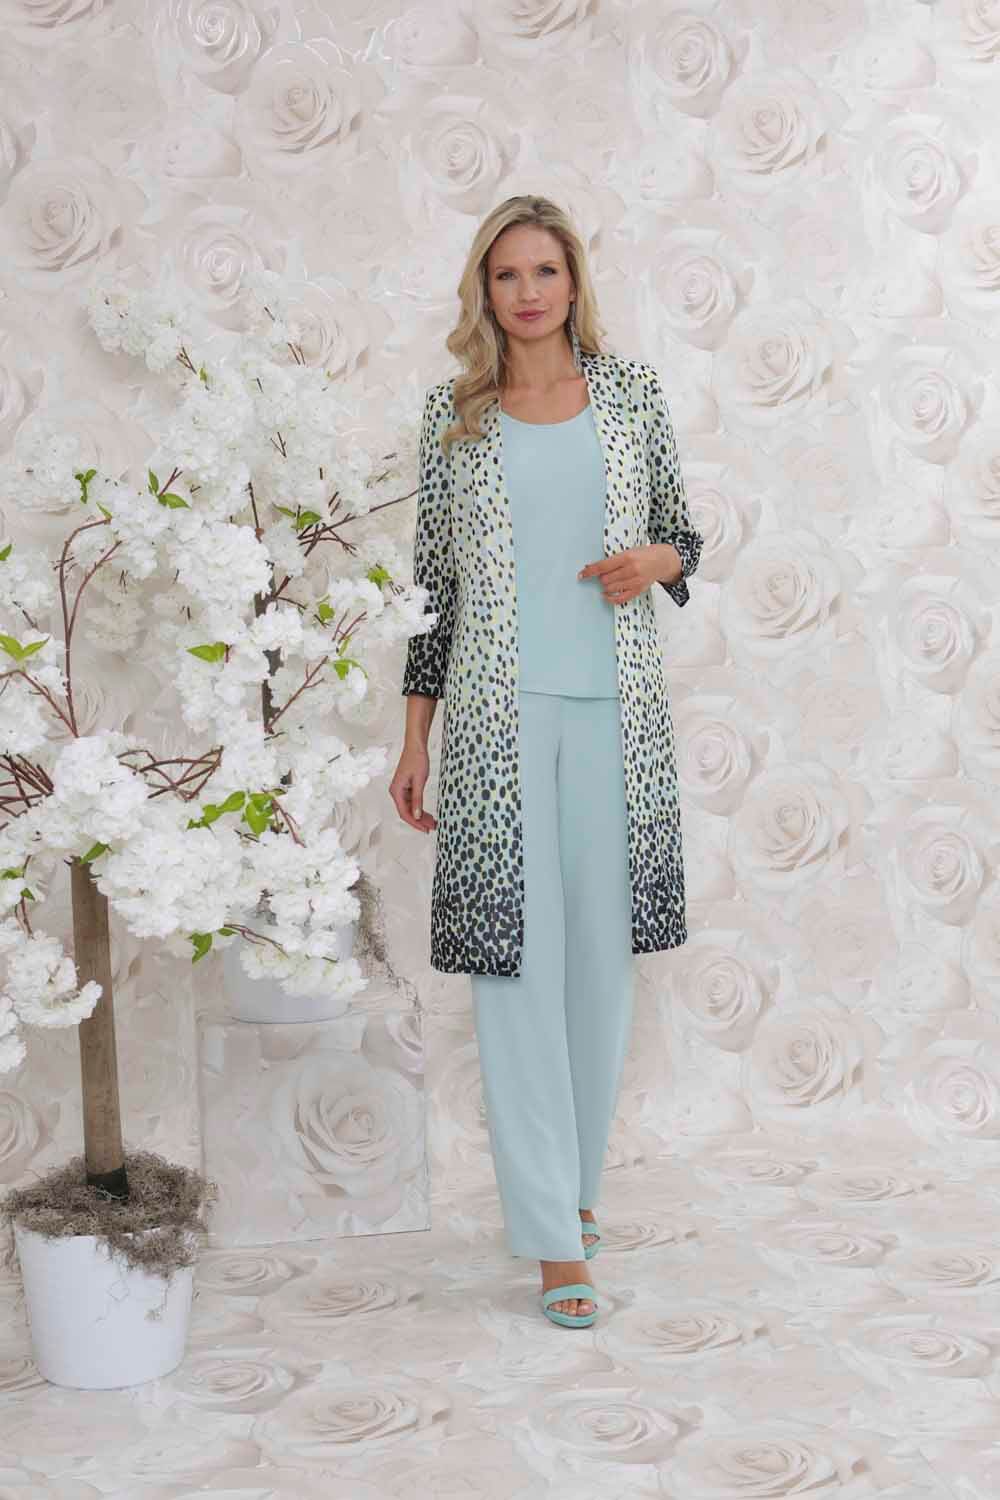 Womens trouser suits How to wear a ladies trouser suit